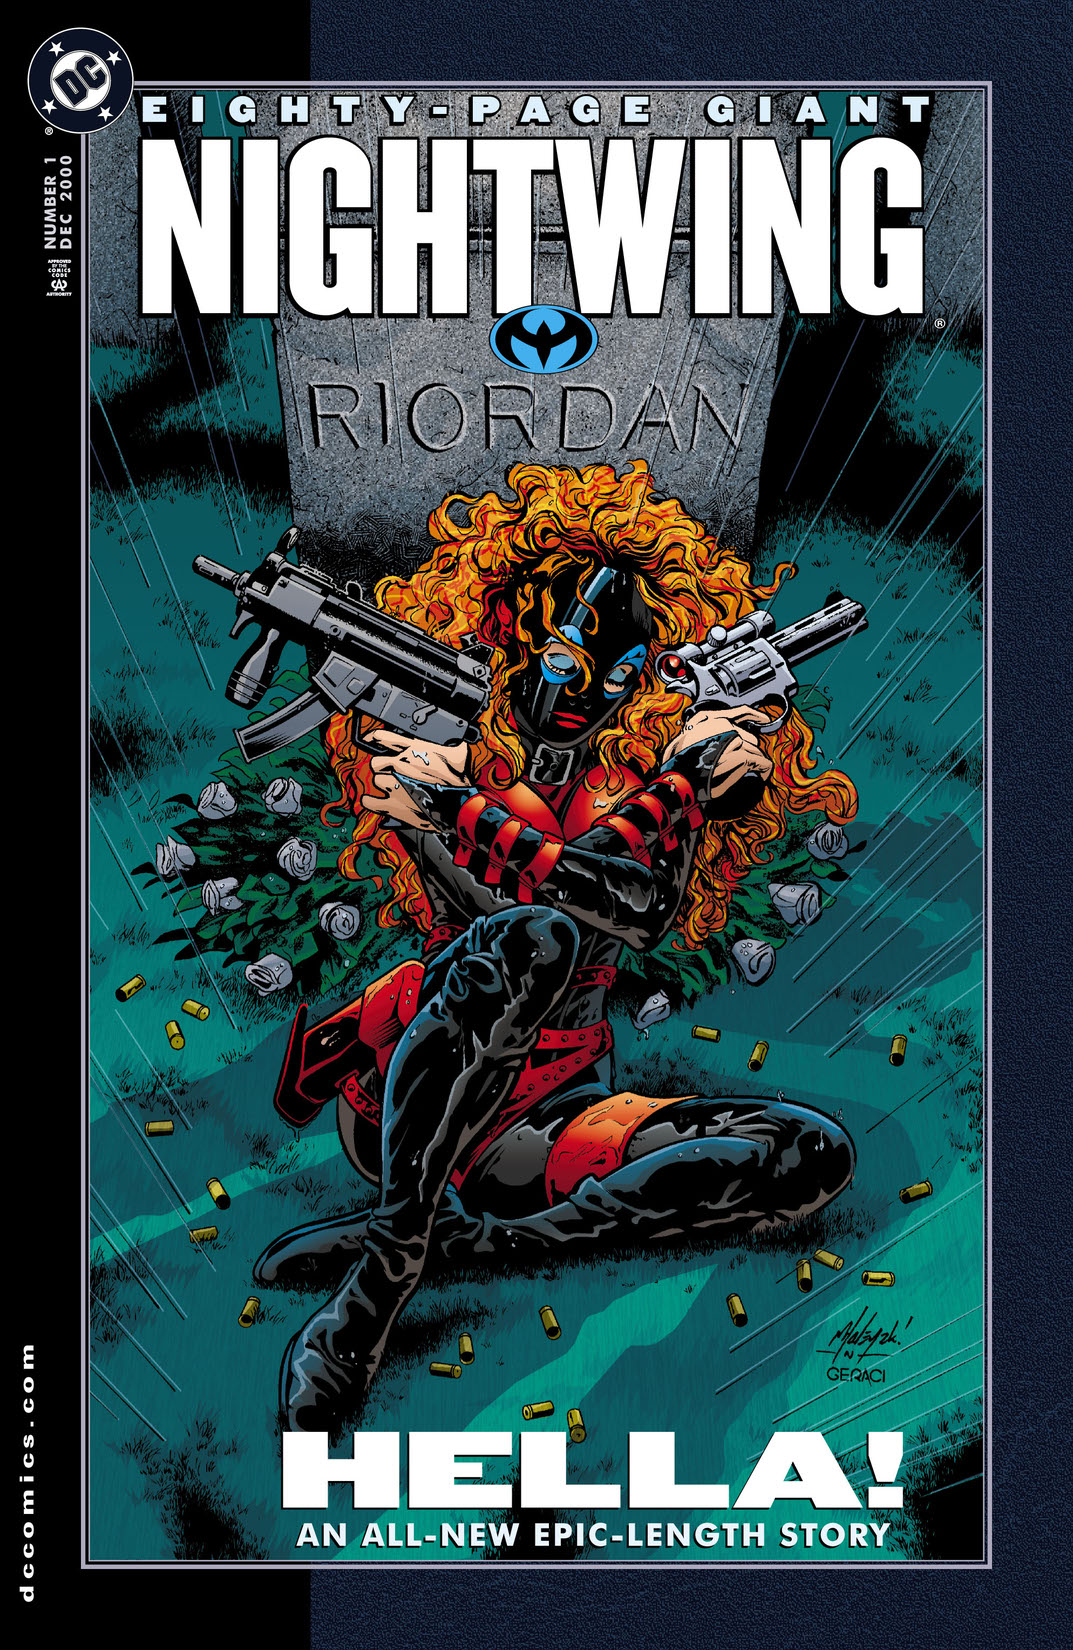 Nightwing 80-Page Giant (2000-) #1 preview images